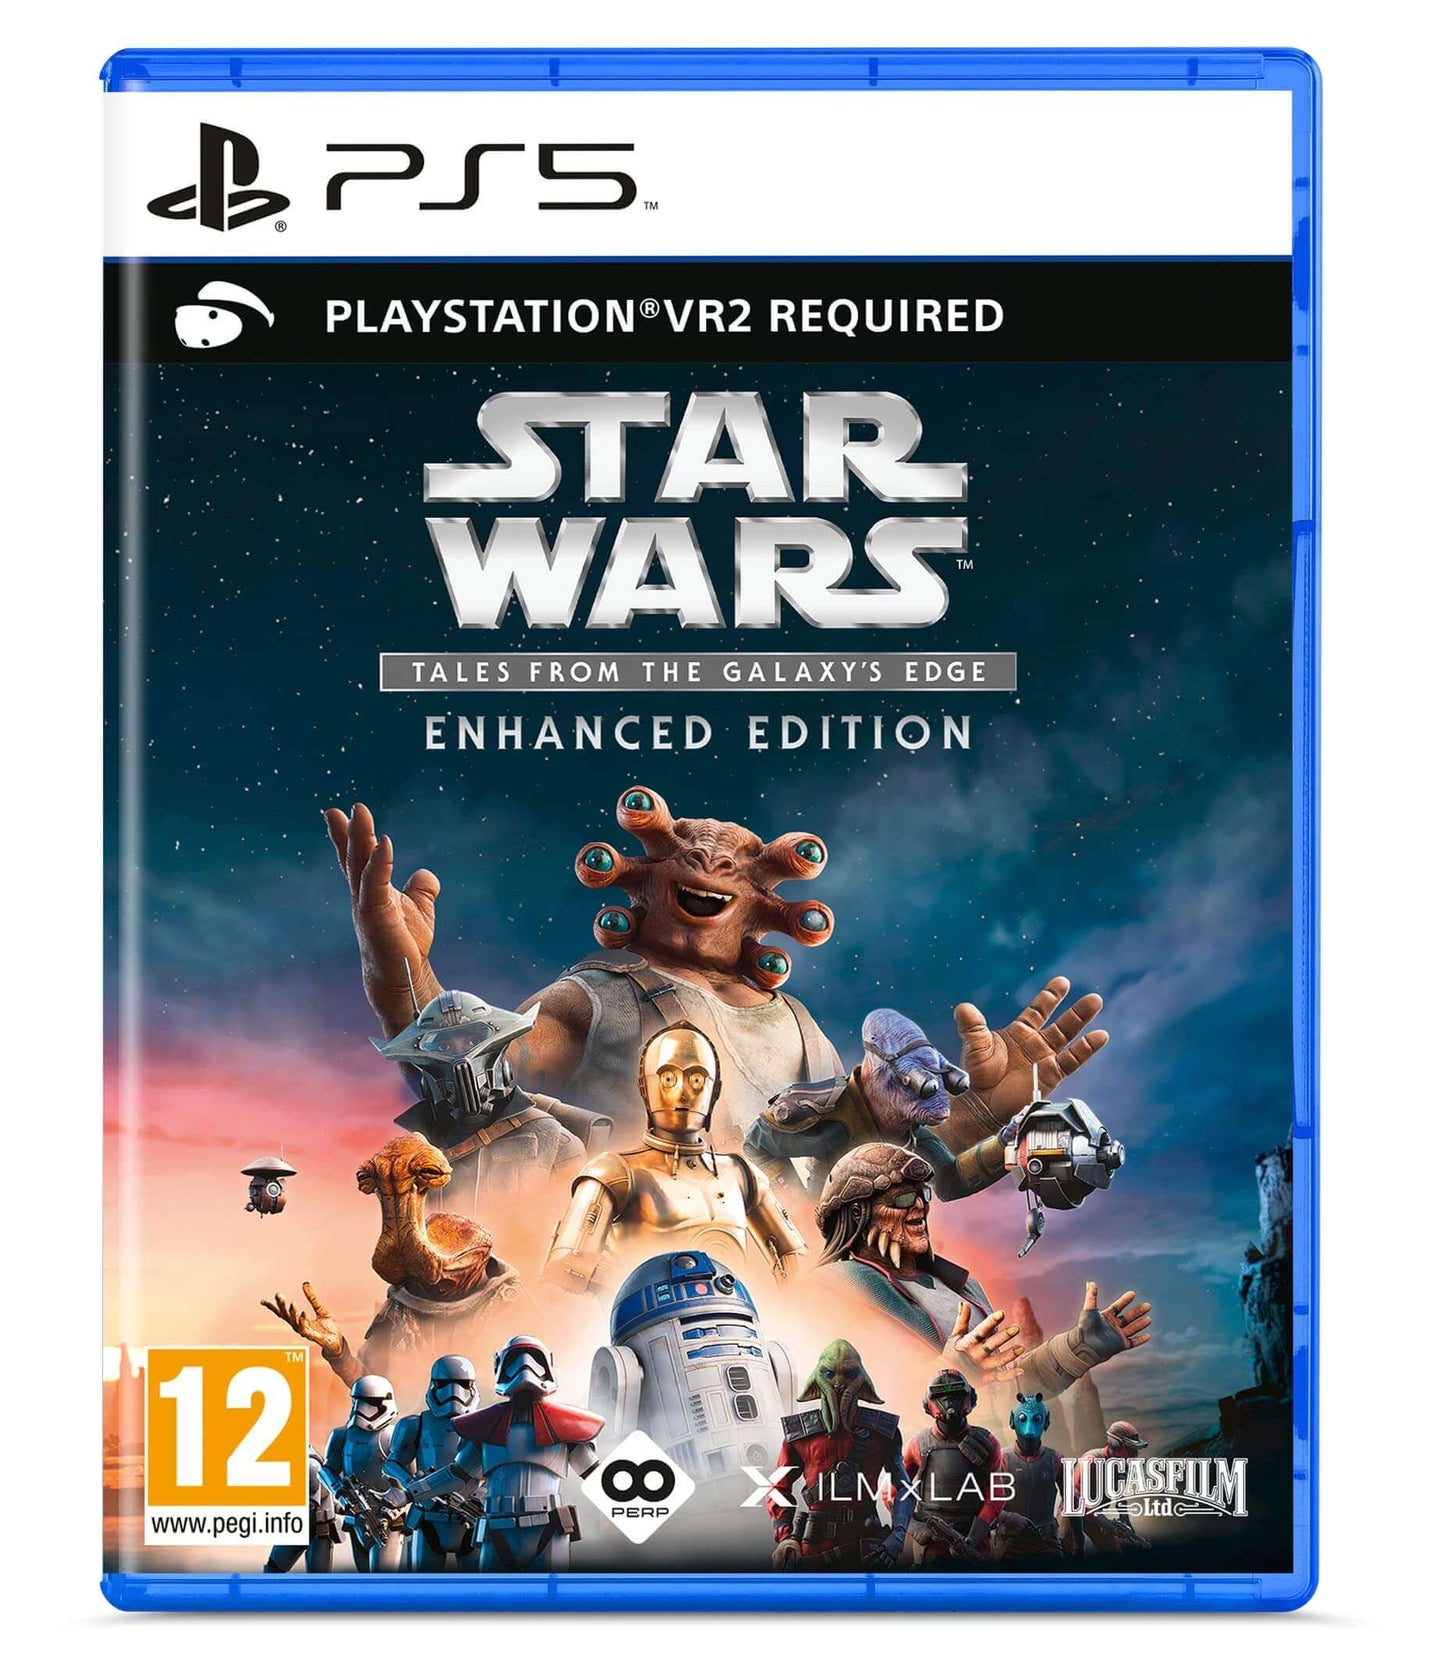 STAR WARS Tales from the Galaxy’s Edge Enhanced Edition PlayStation VR2 £41.99